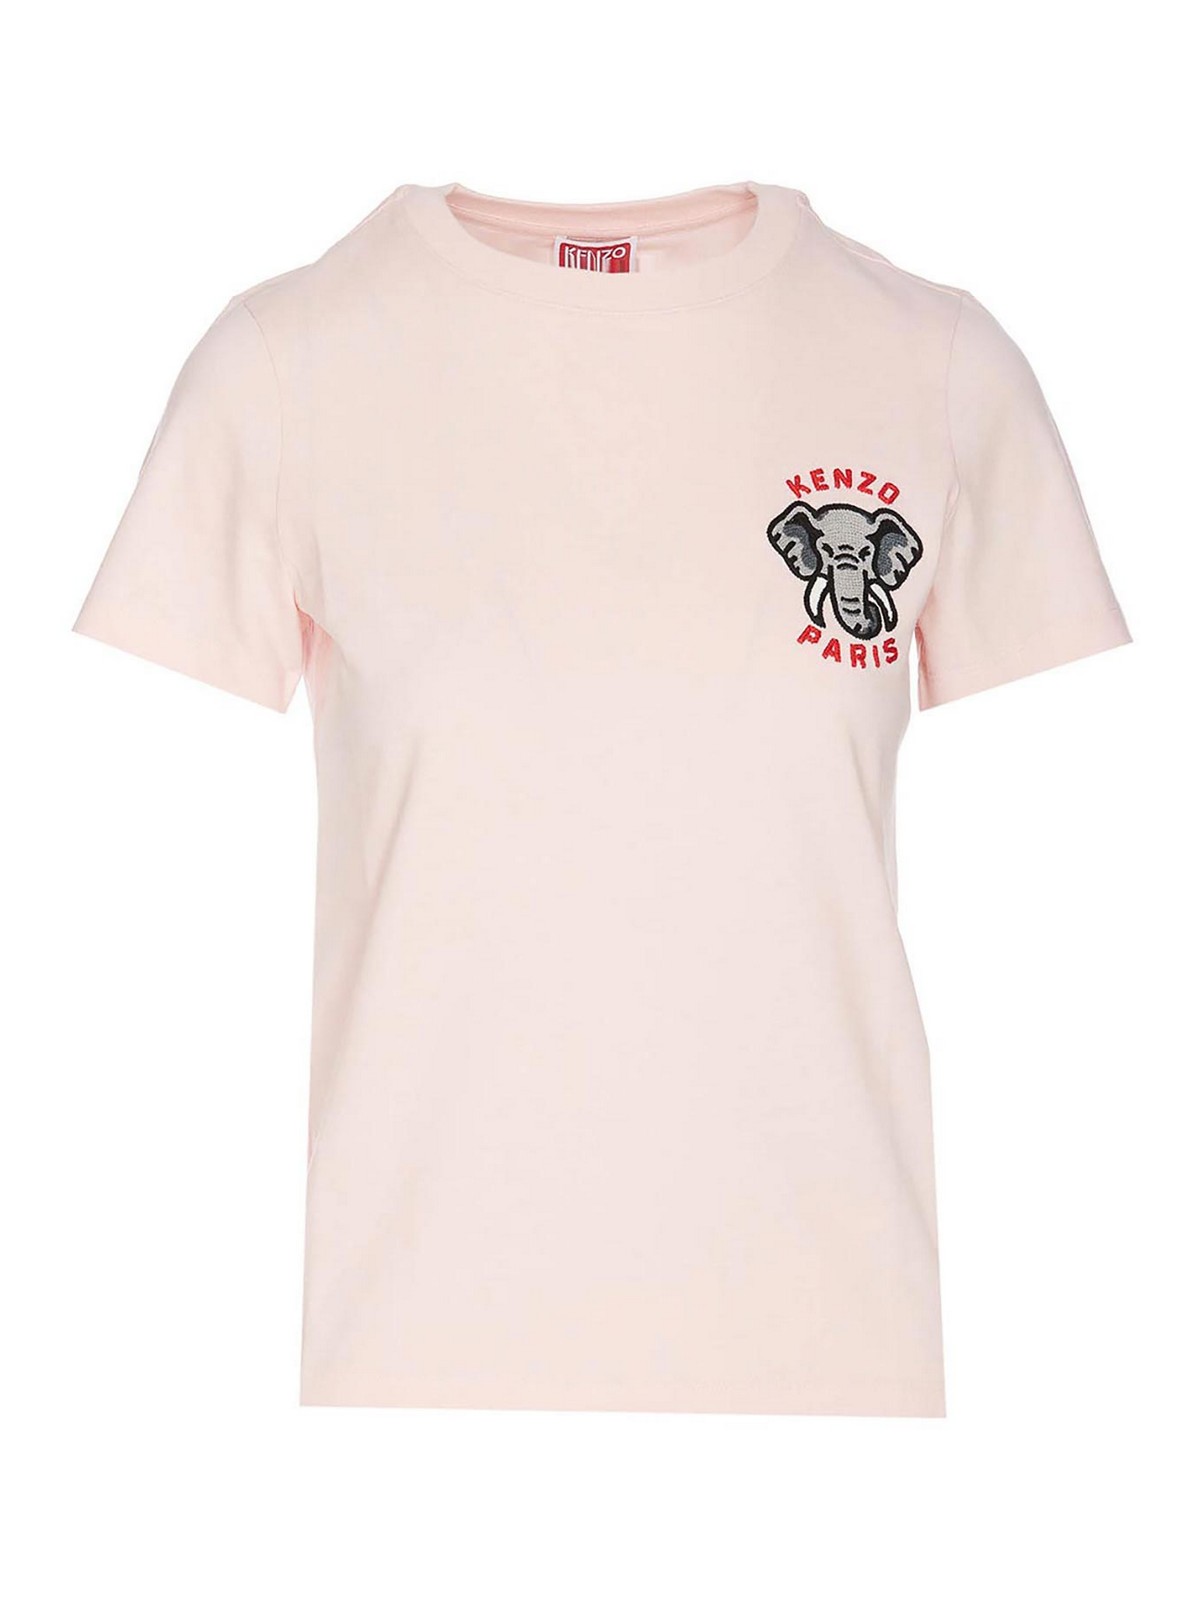 Kenzo Crest Elephant T-shirt In Nude & Neutrals